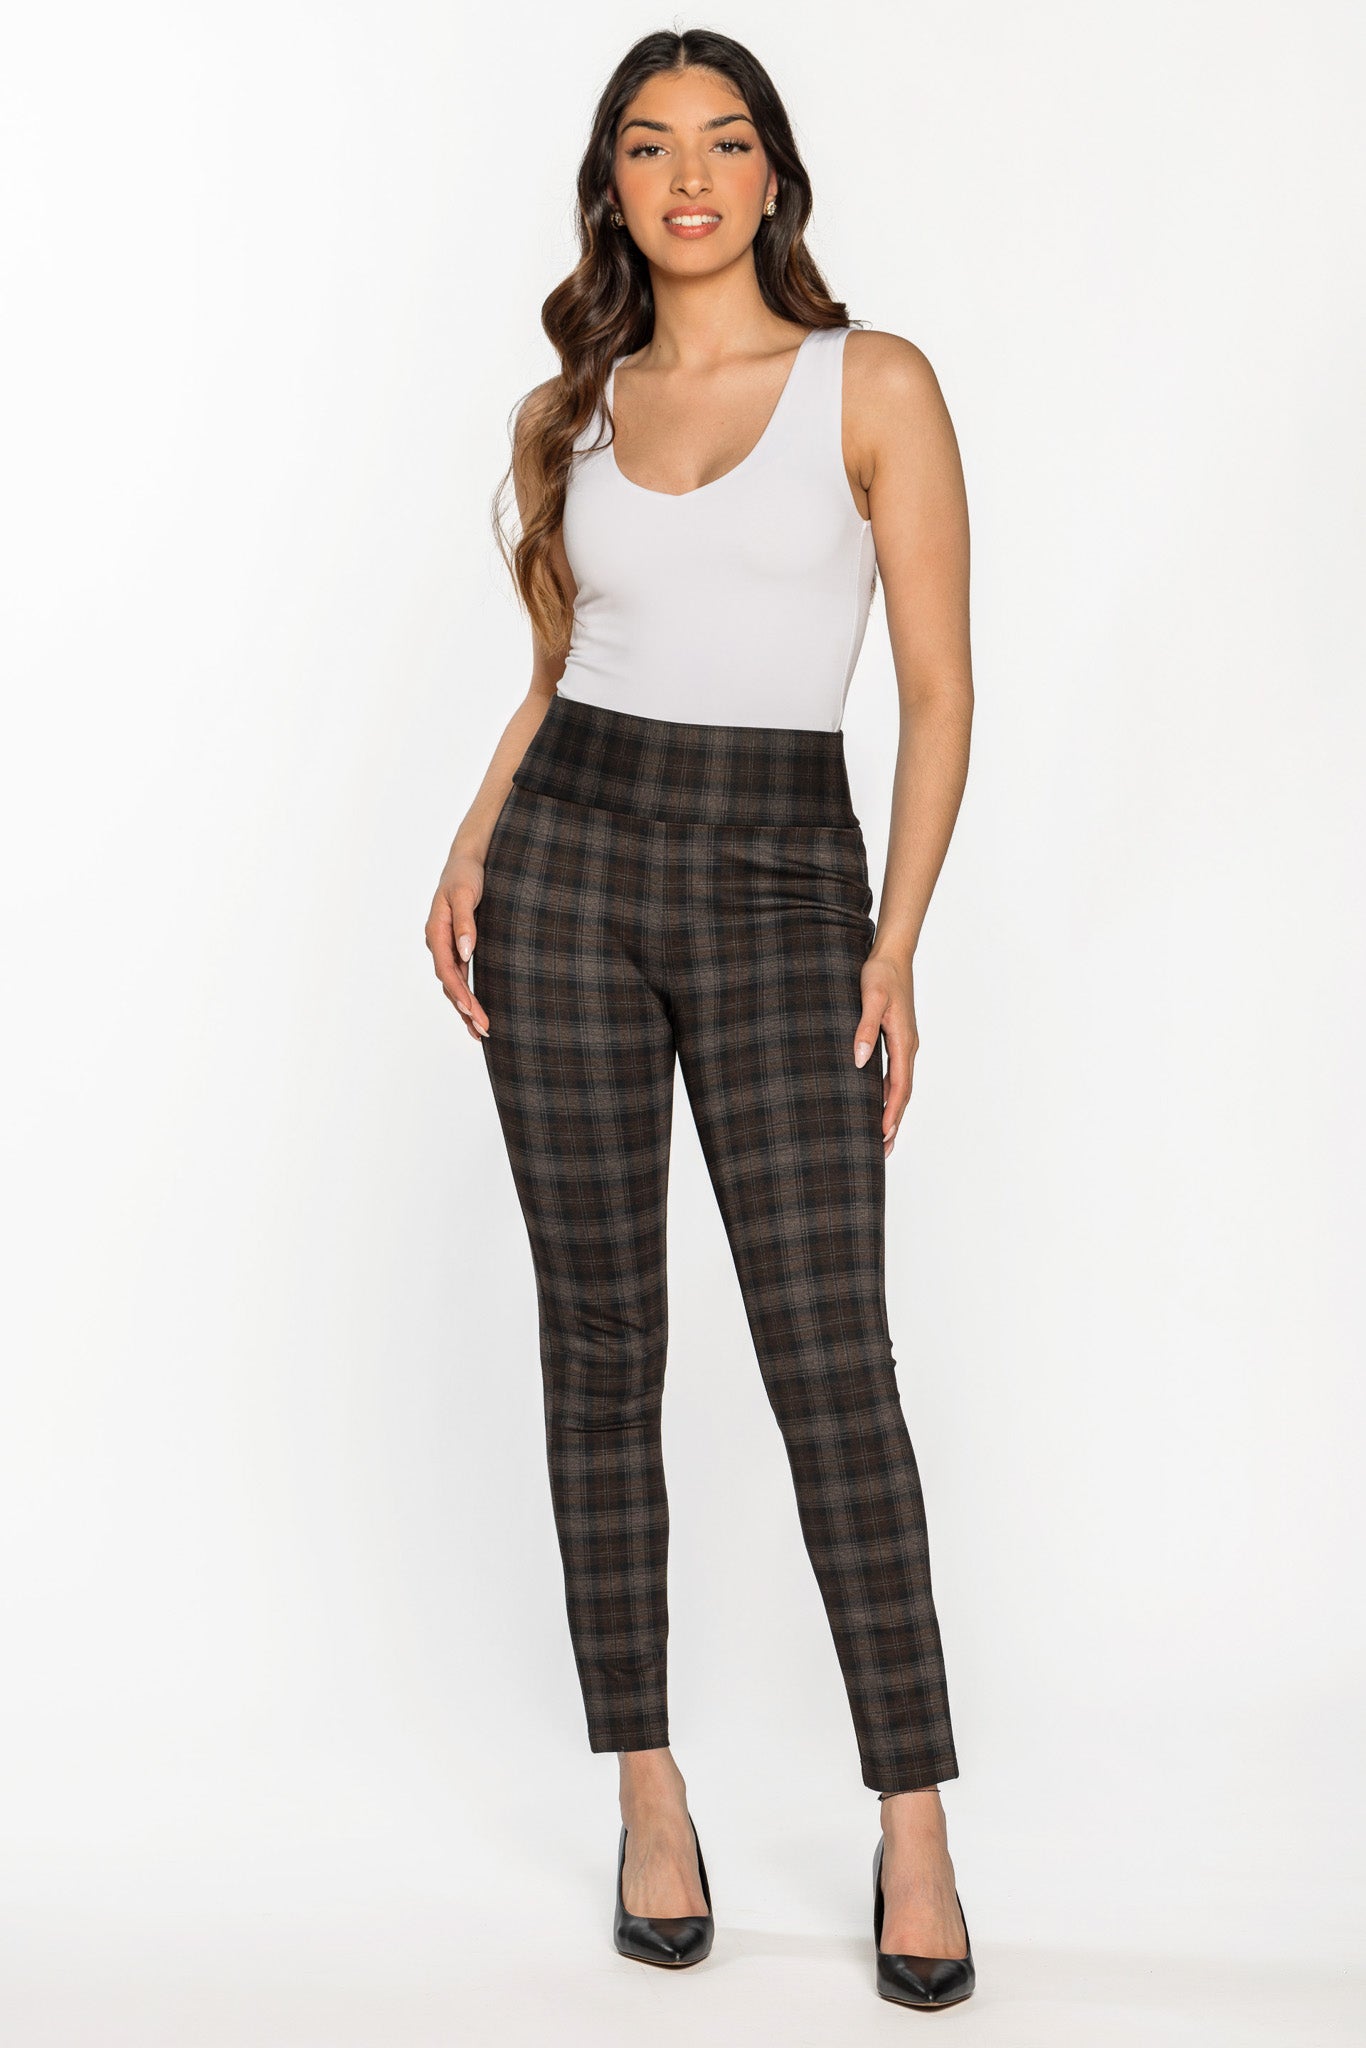 Constance Plaid Seriously Slimming Pant